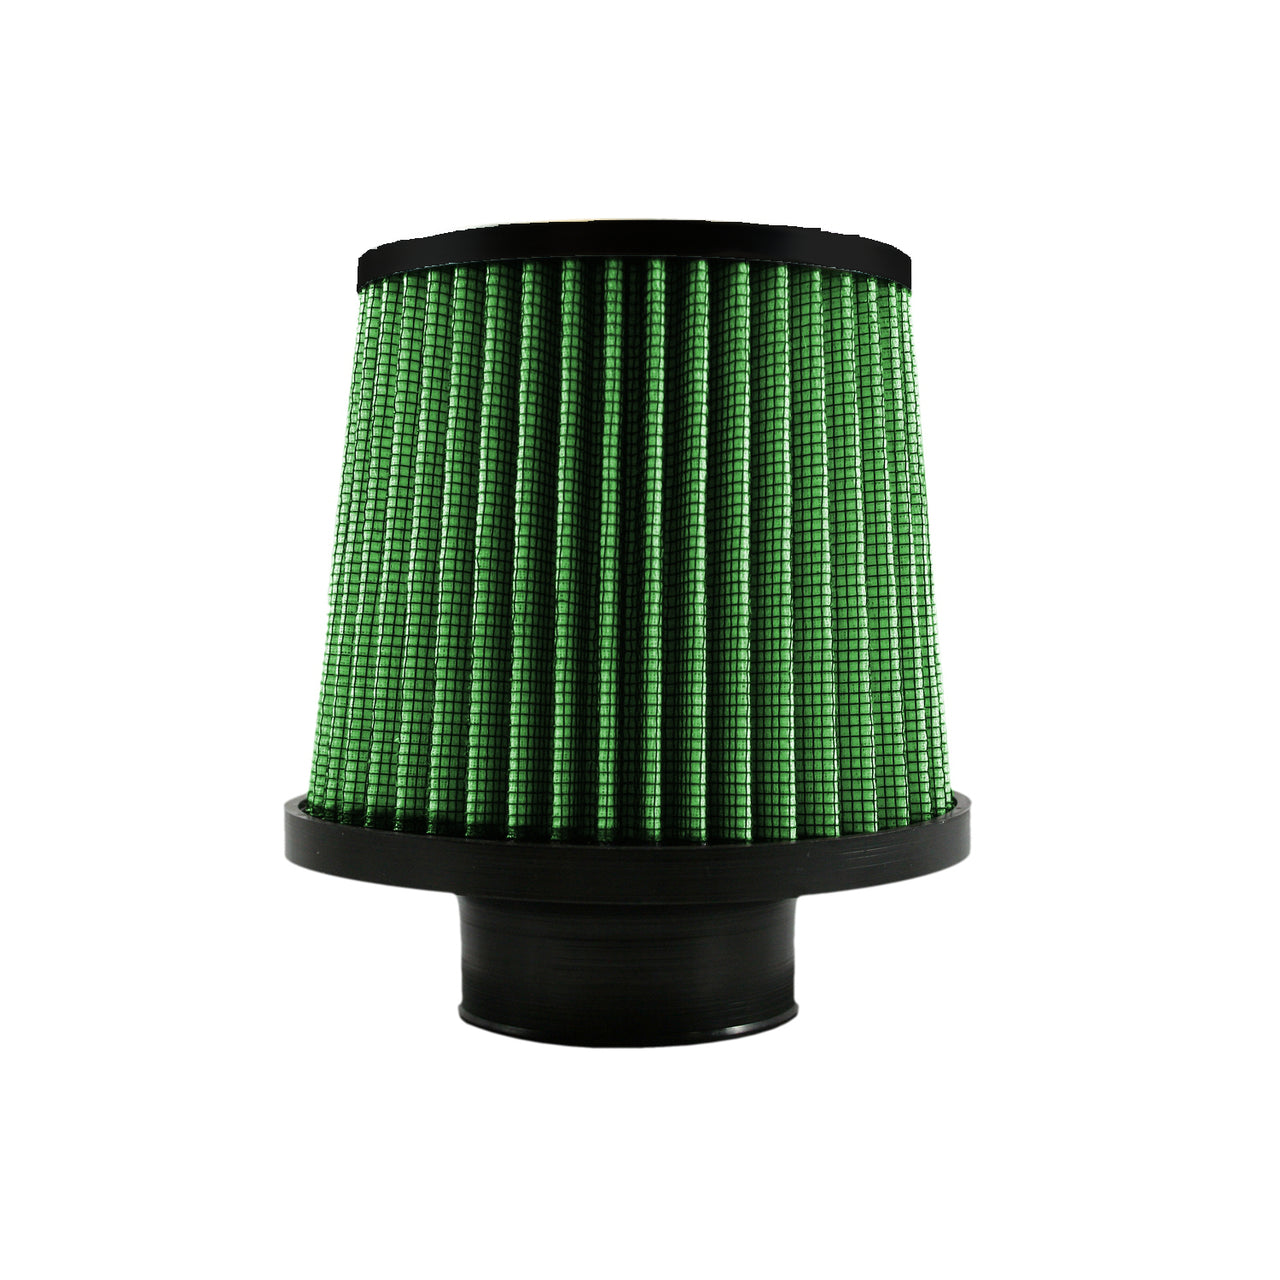 Green Filter Cone Filter - ID 2.5in. / Base 6in. / Top 5in. / H 5in.